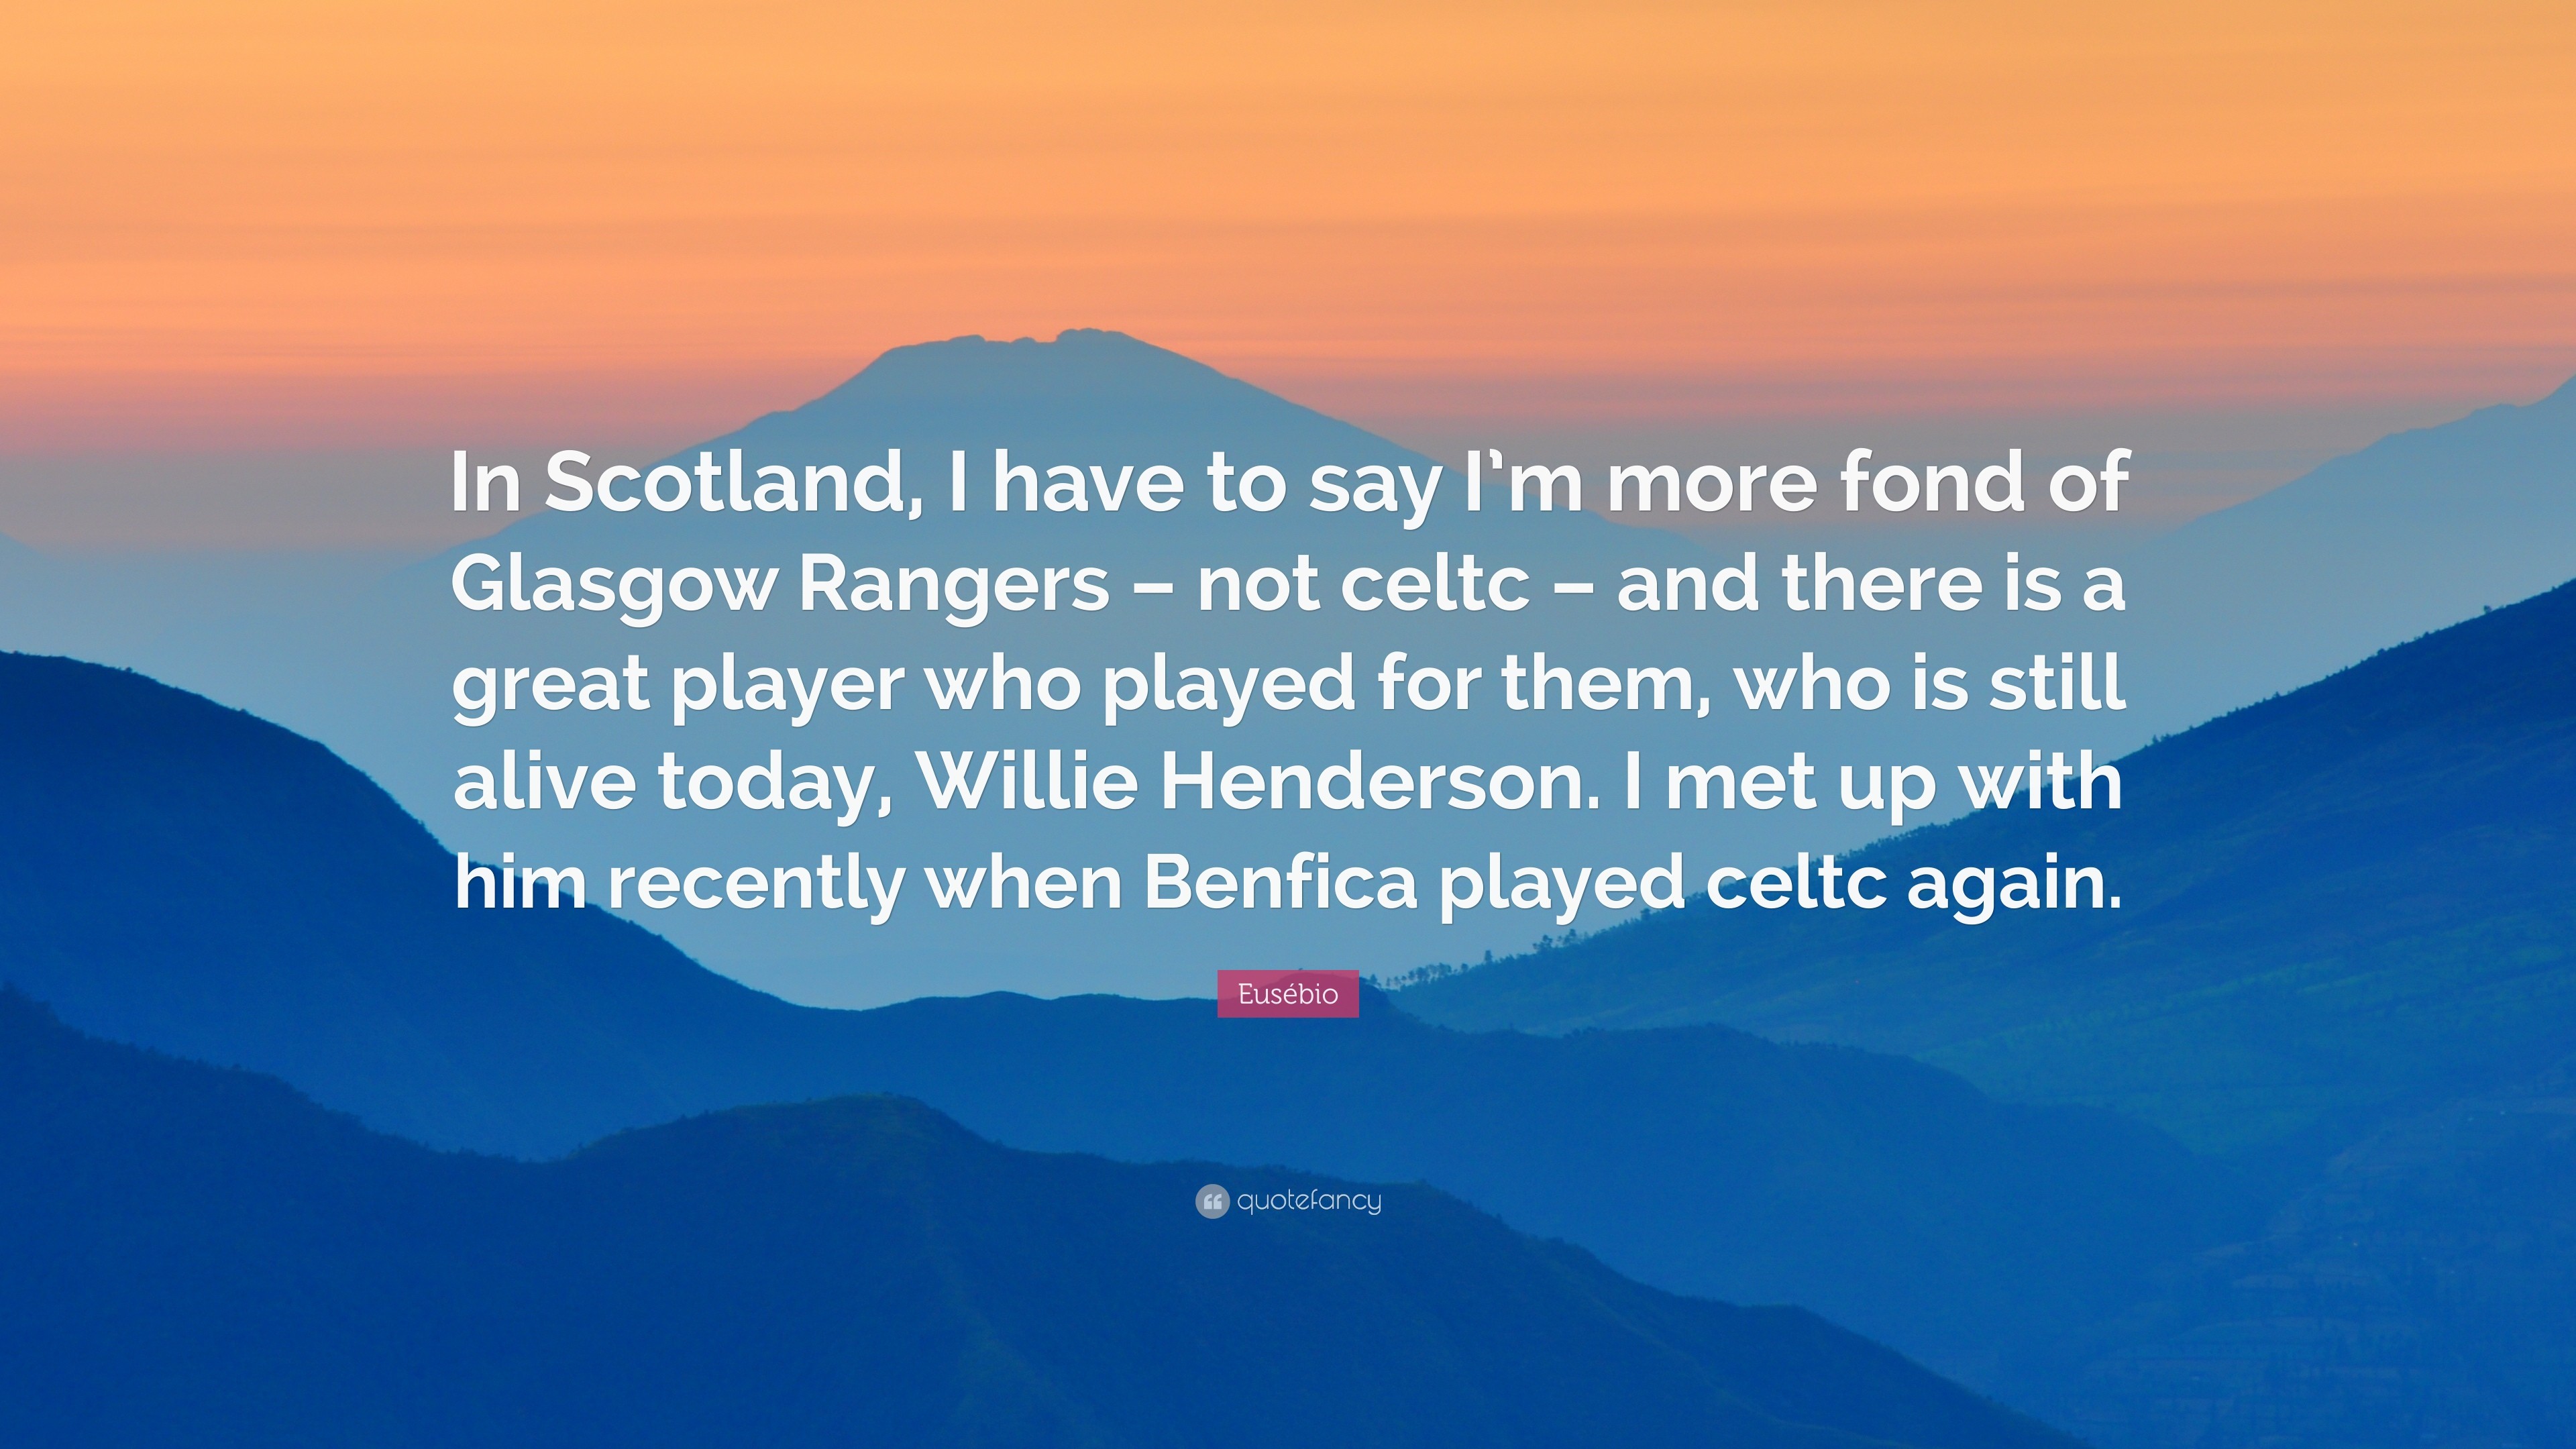 3840x2160 EusÃ©bio Quote: “In Scotland, I have to say I'm more fond